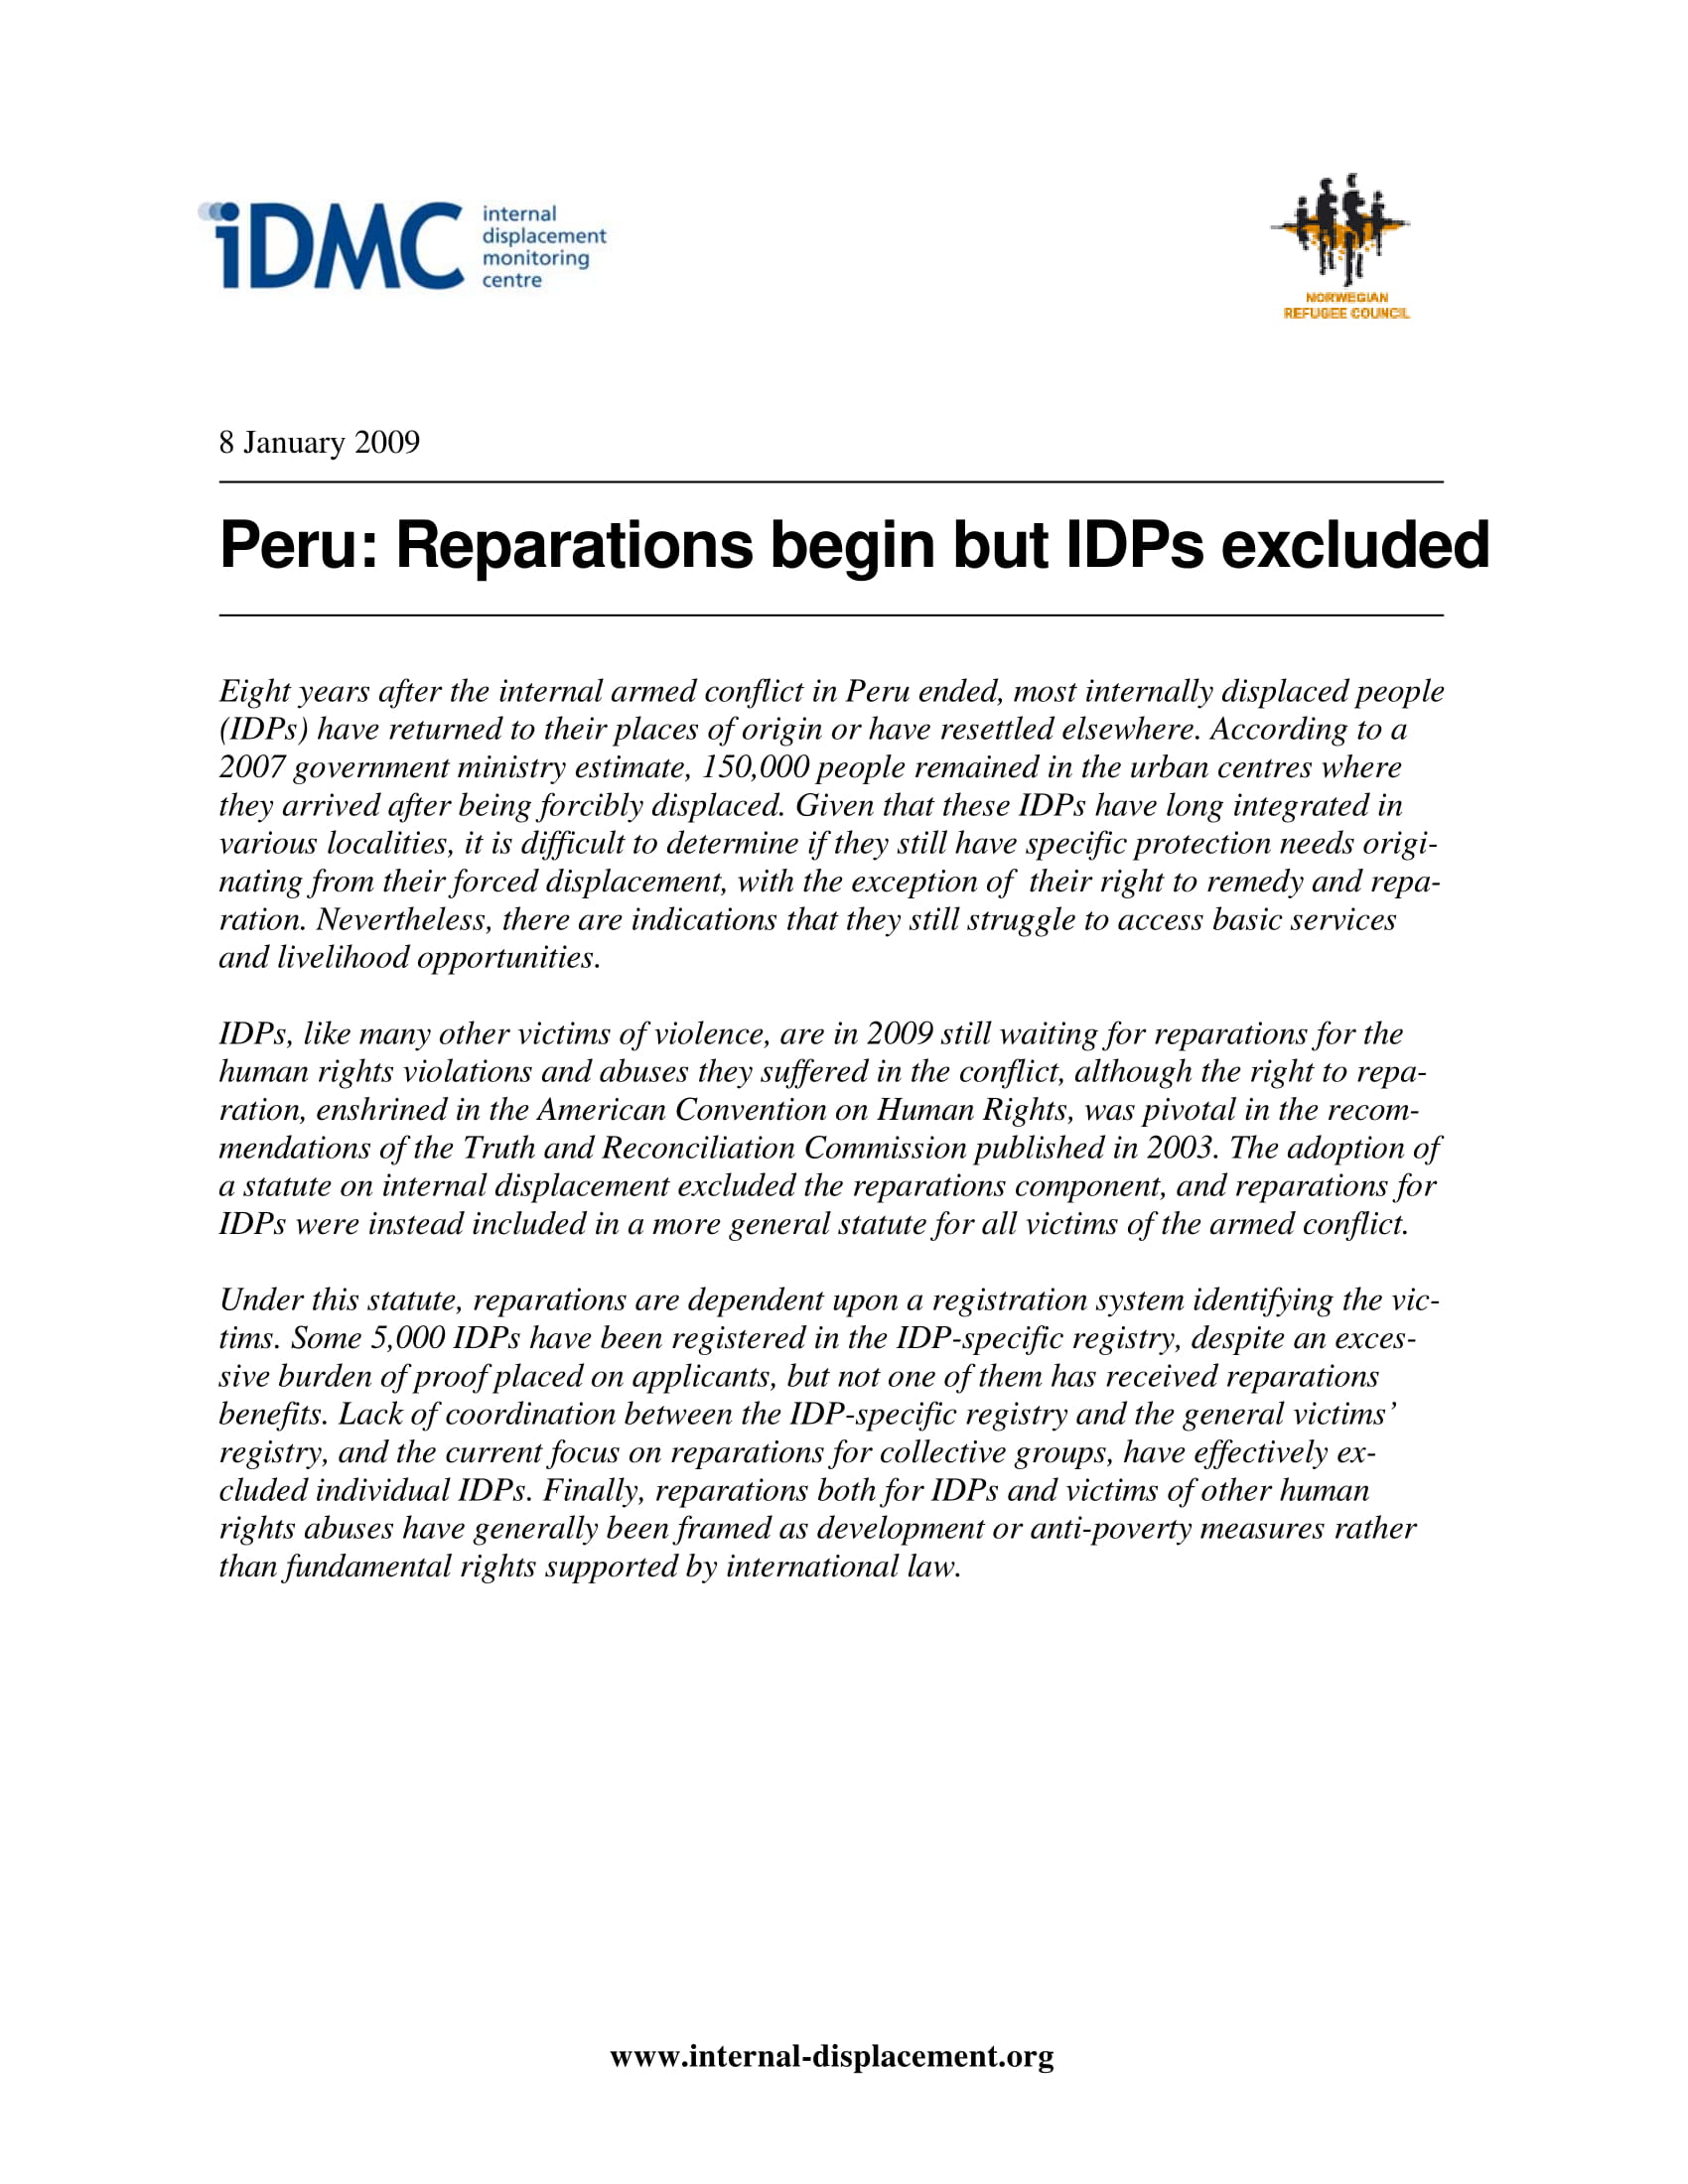 Peru: Reparations begin but IDPs excluded